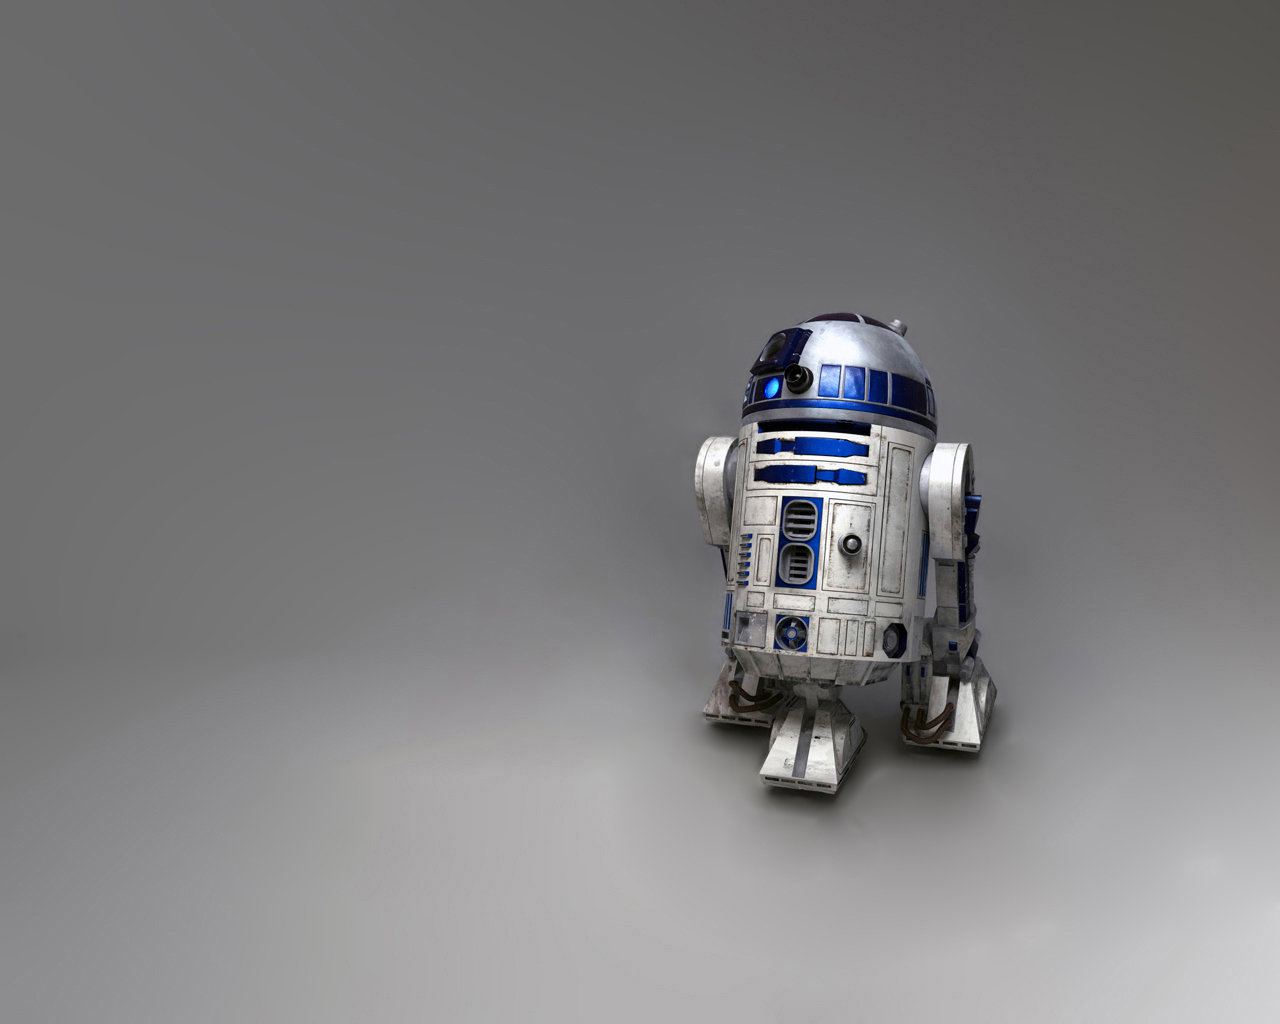 Star Wars Droid Wallpapers